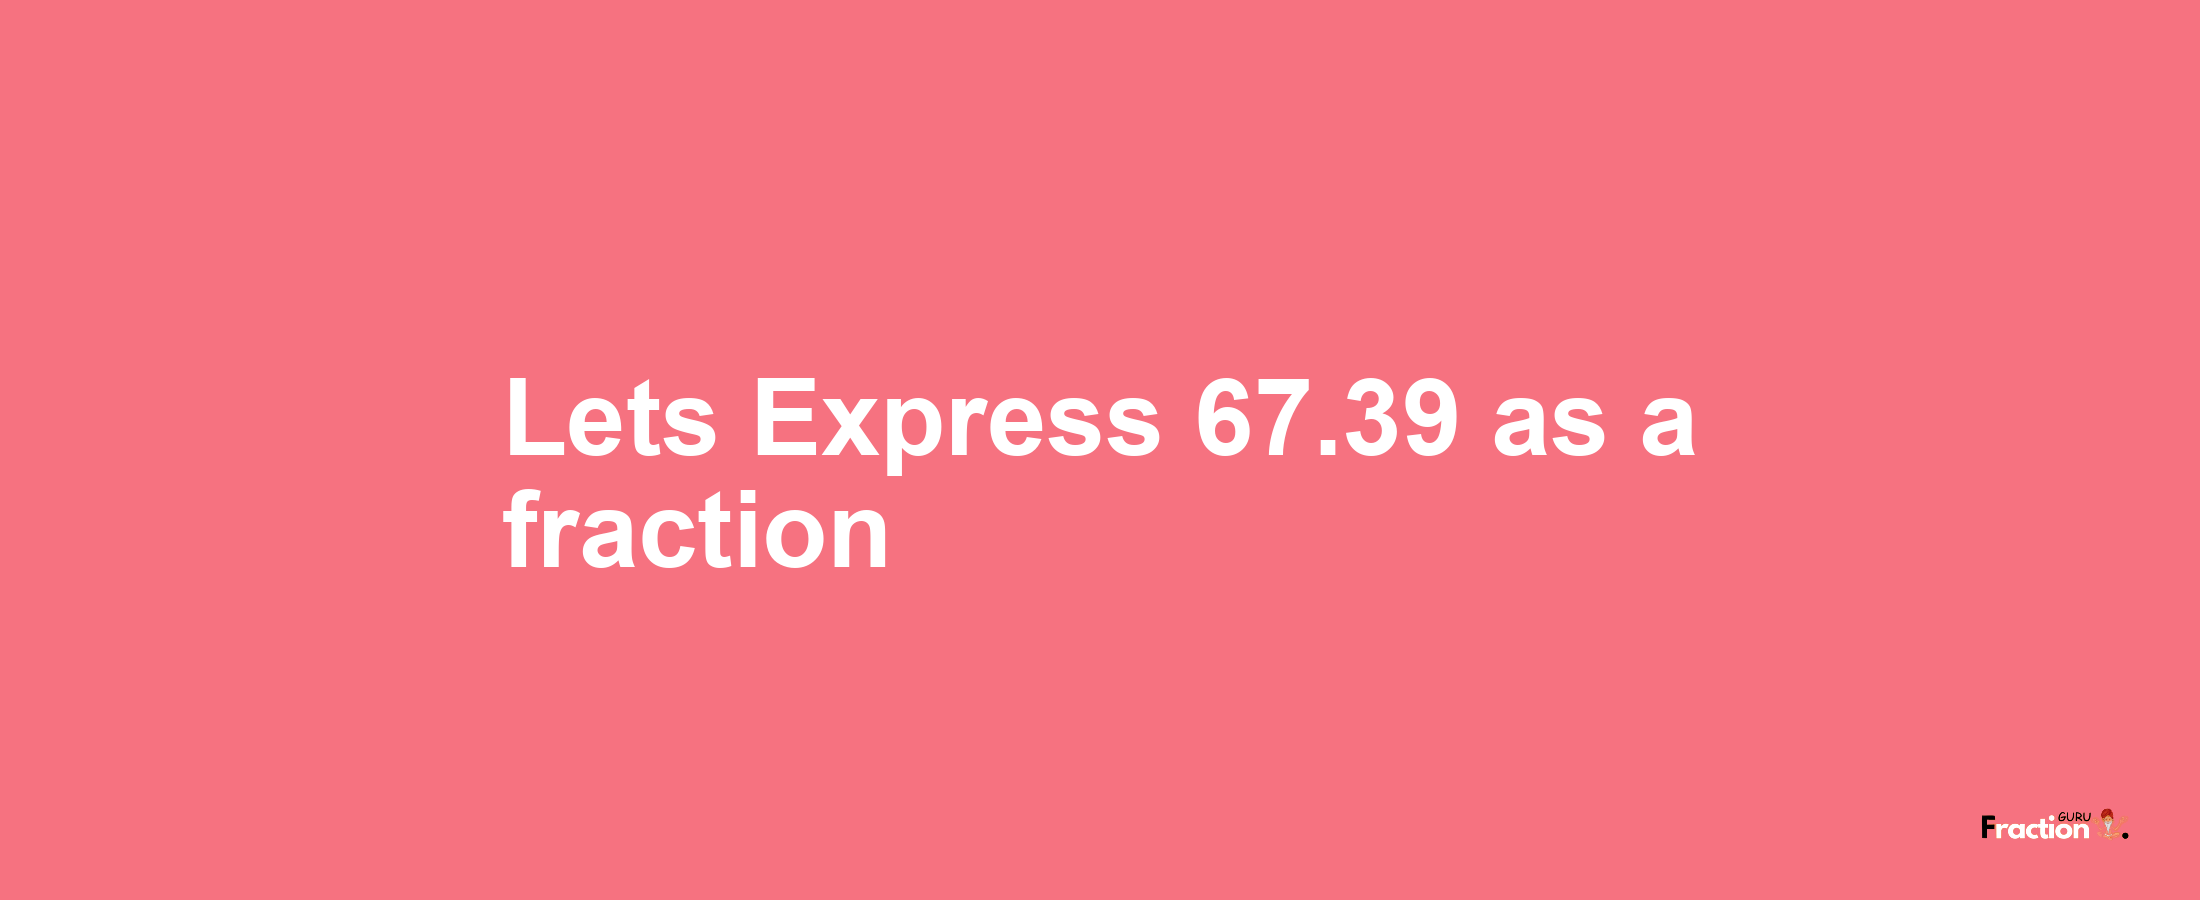 Lets Express 67.39 as afraction